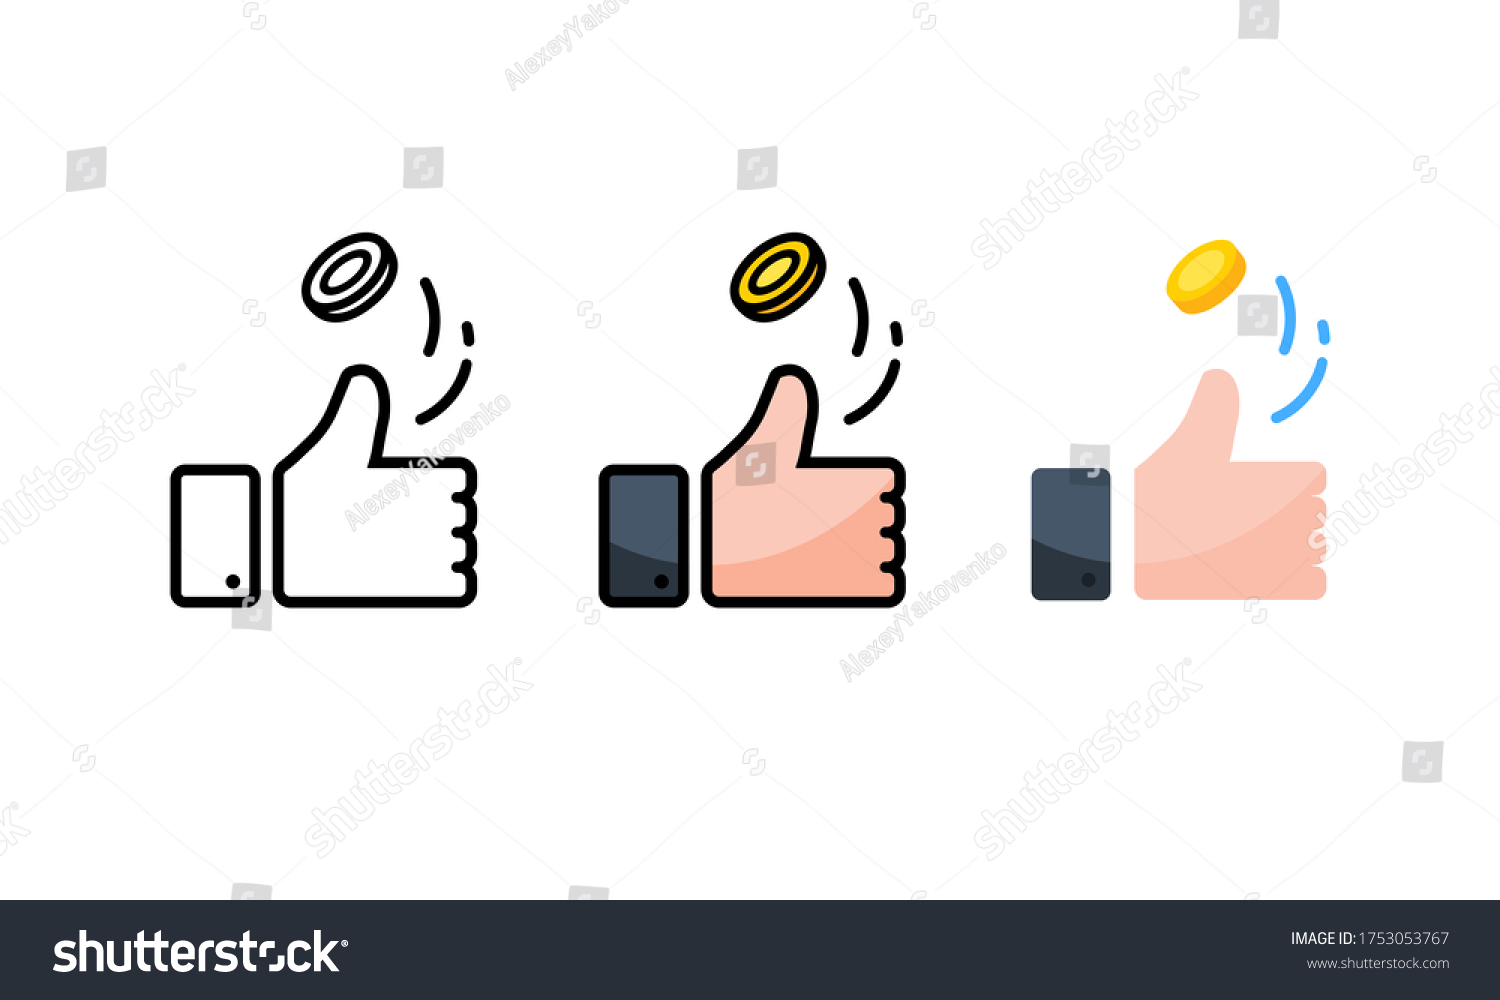 SVG of Hand is tossing coin. Heads or tails. Coin flipping icon set on isolated white background. Eps 10 vector svg